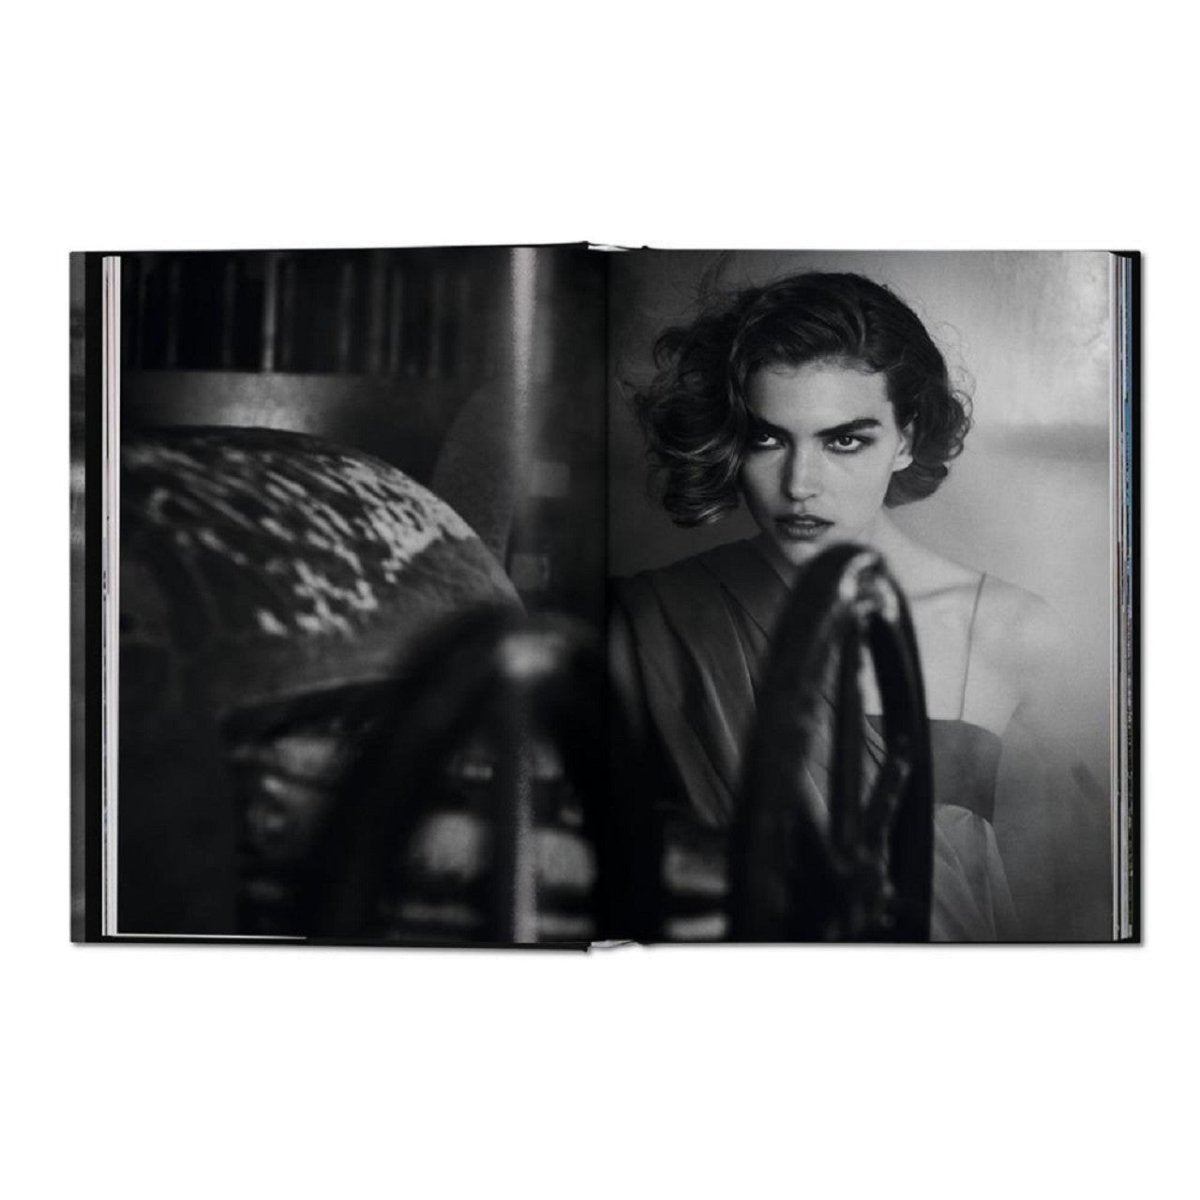 Taschen Peter Lindbergh On Fashion Photography  - Allike Store